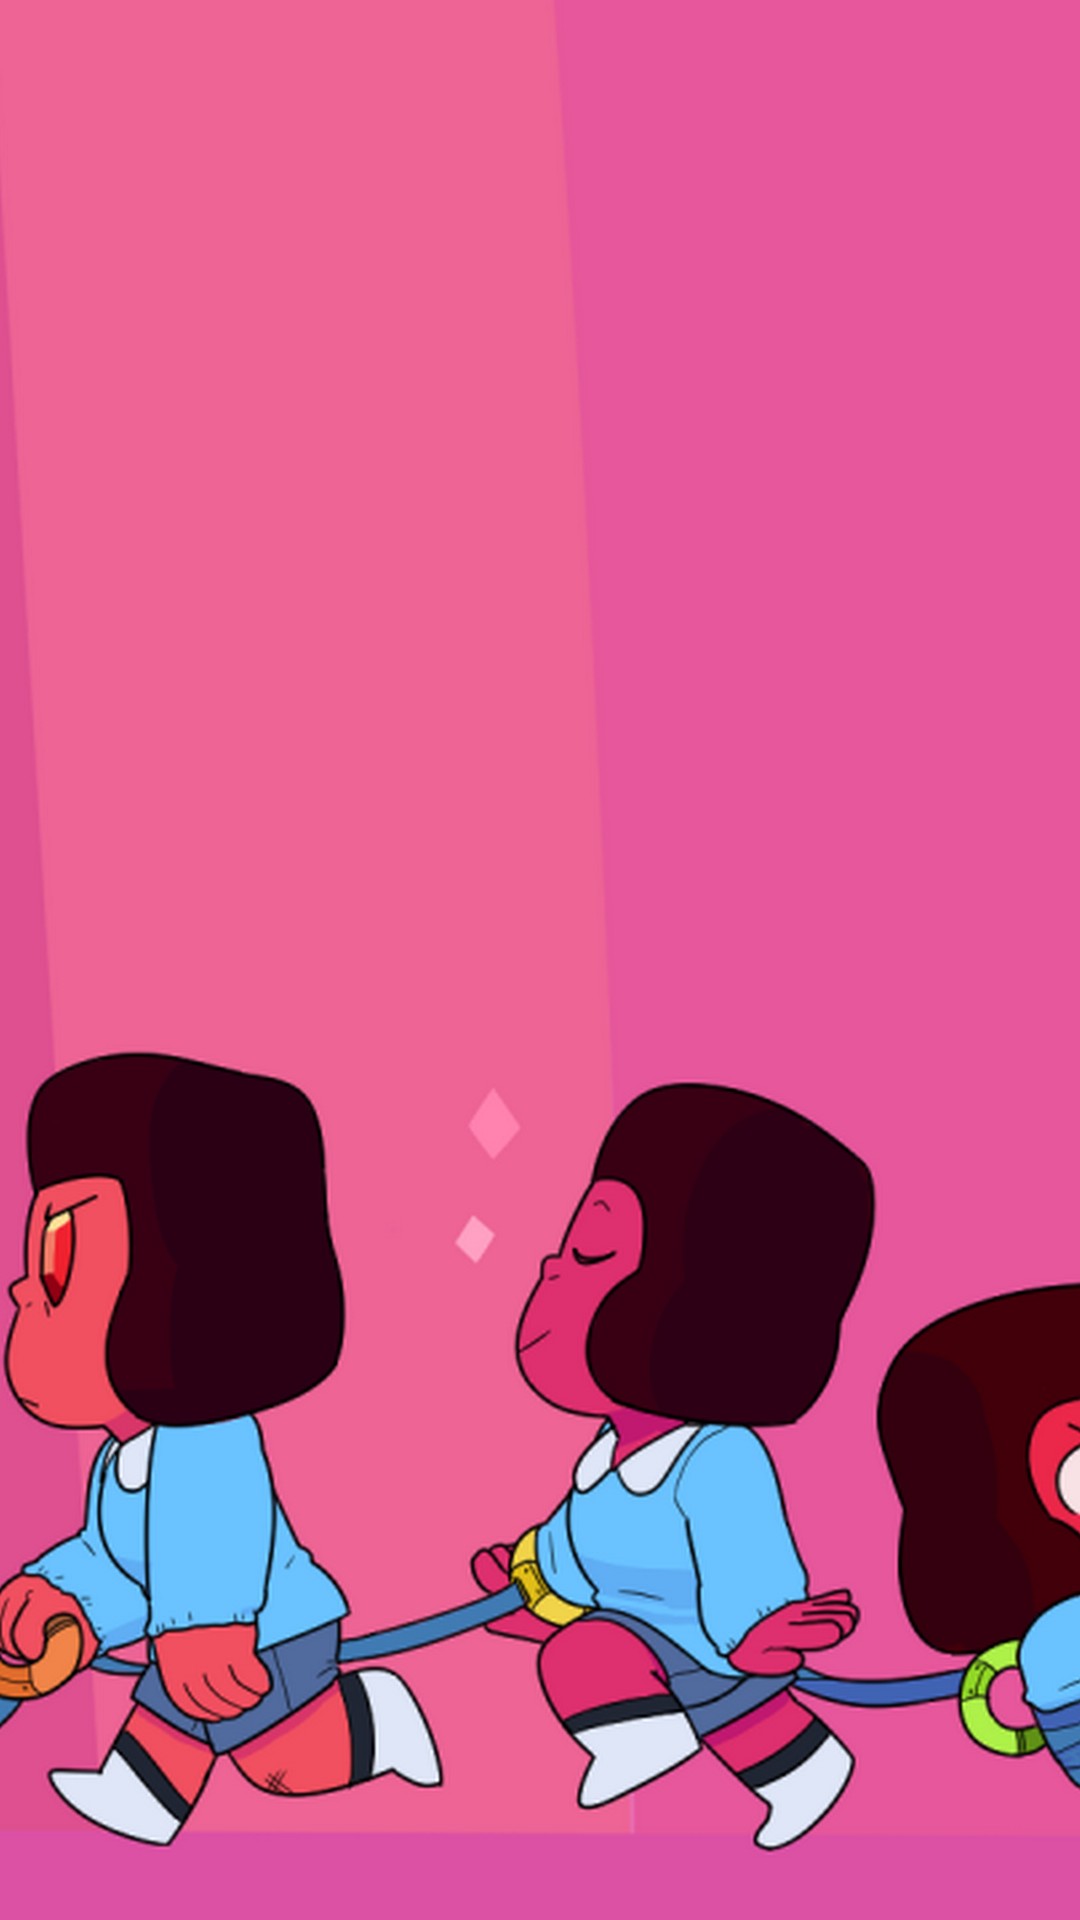 Steven Universe iPhone 7 Wallpaper With high-resolution 1080X1920 pixel. You can use this wallpaper for your iPhone 5, 6, 7, 8, X, XS, XR backgrounds, Mobile Screensaver, or iPad Lock Screen